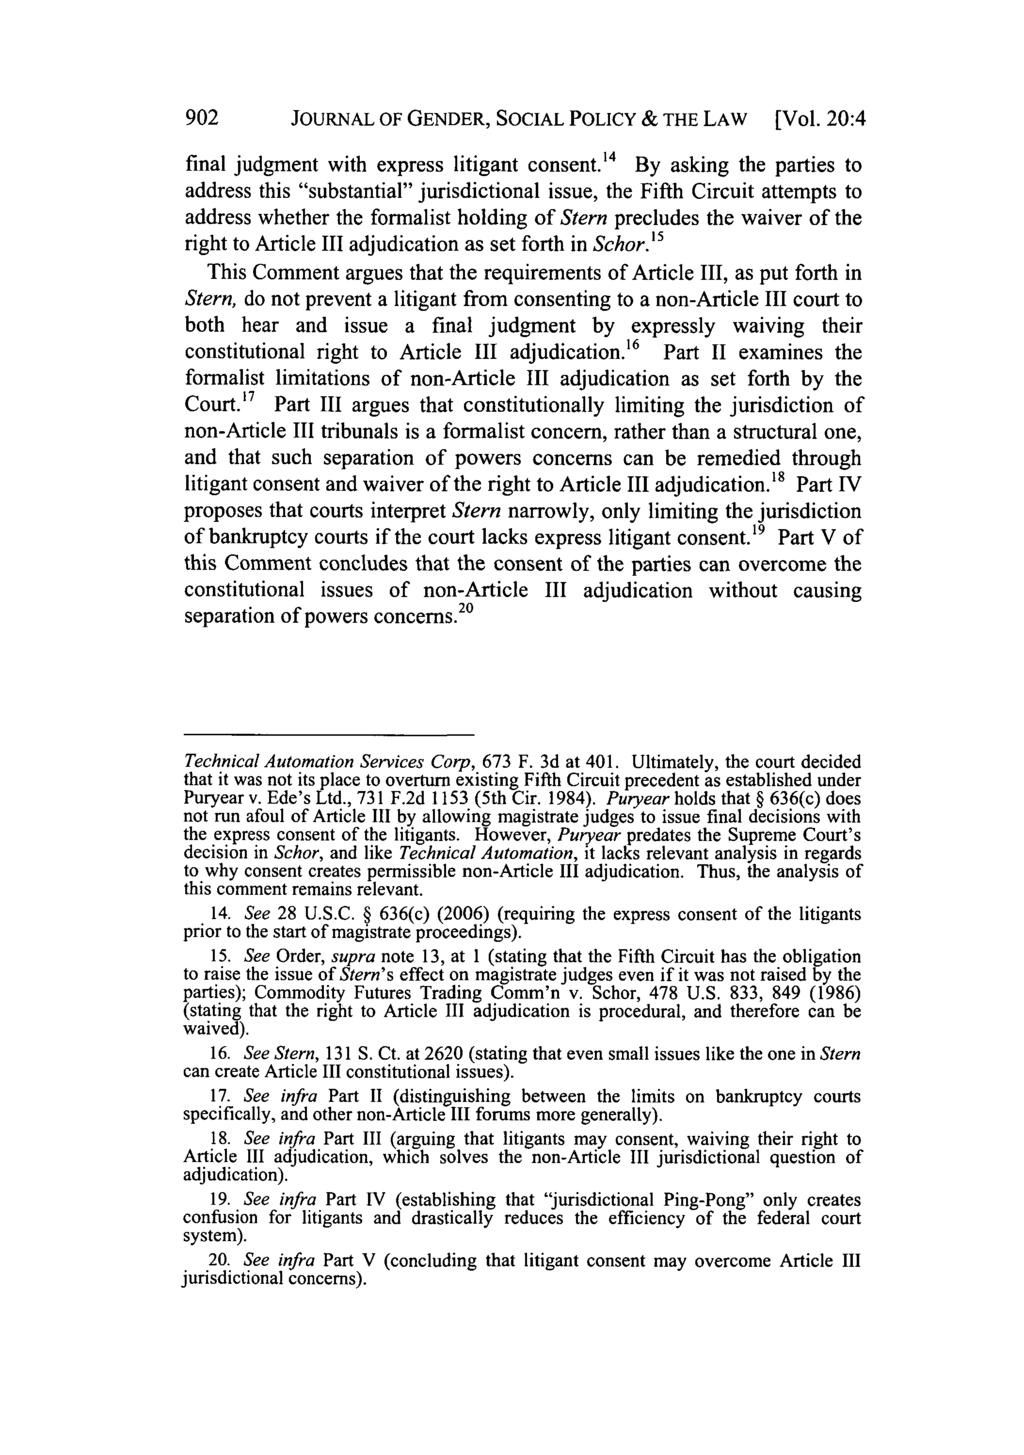 Journal of Gender, Social Policy & the Law, Vol. 20, Iss. 4 [2012], Art. 8 902 JOURNAL OF GENDER, SOCIAL POLICY & THE LAW [Vol. 20:4 final judgment with express litigant consent.